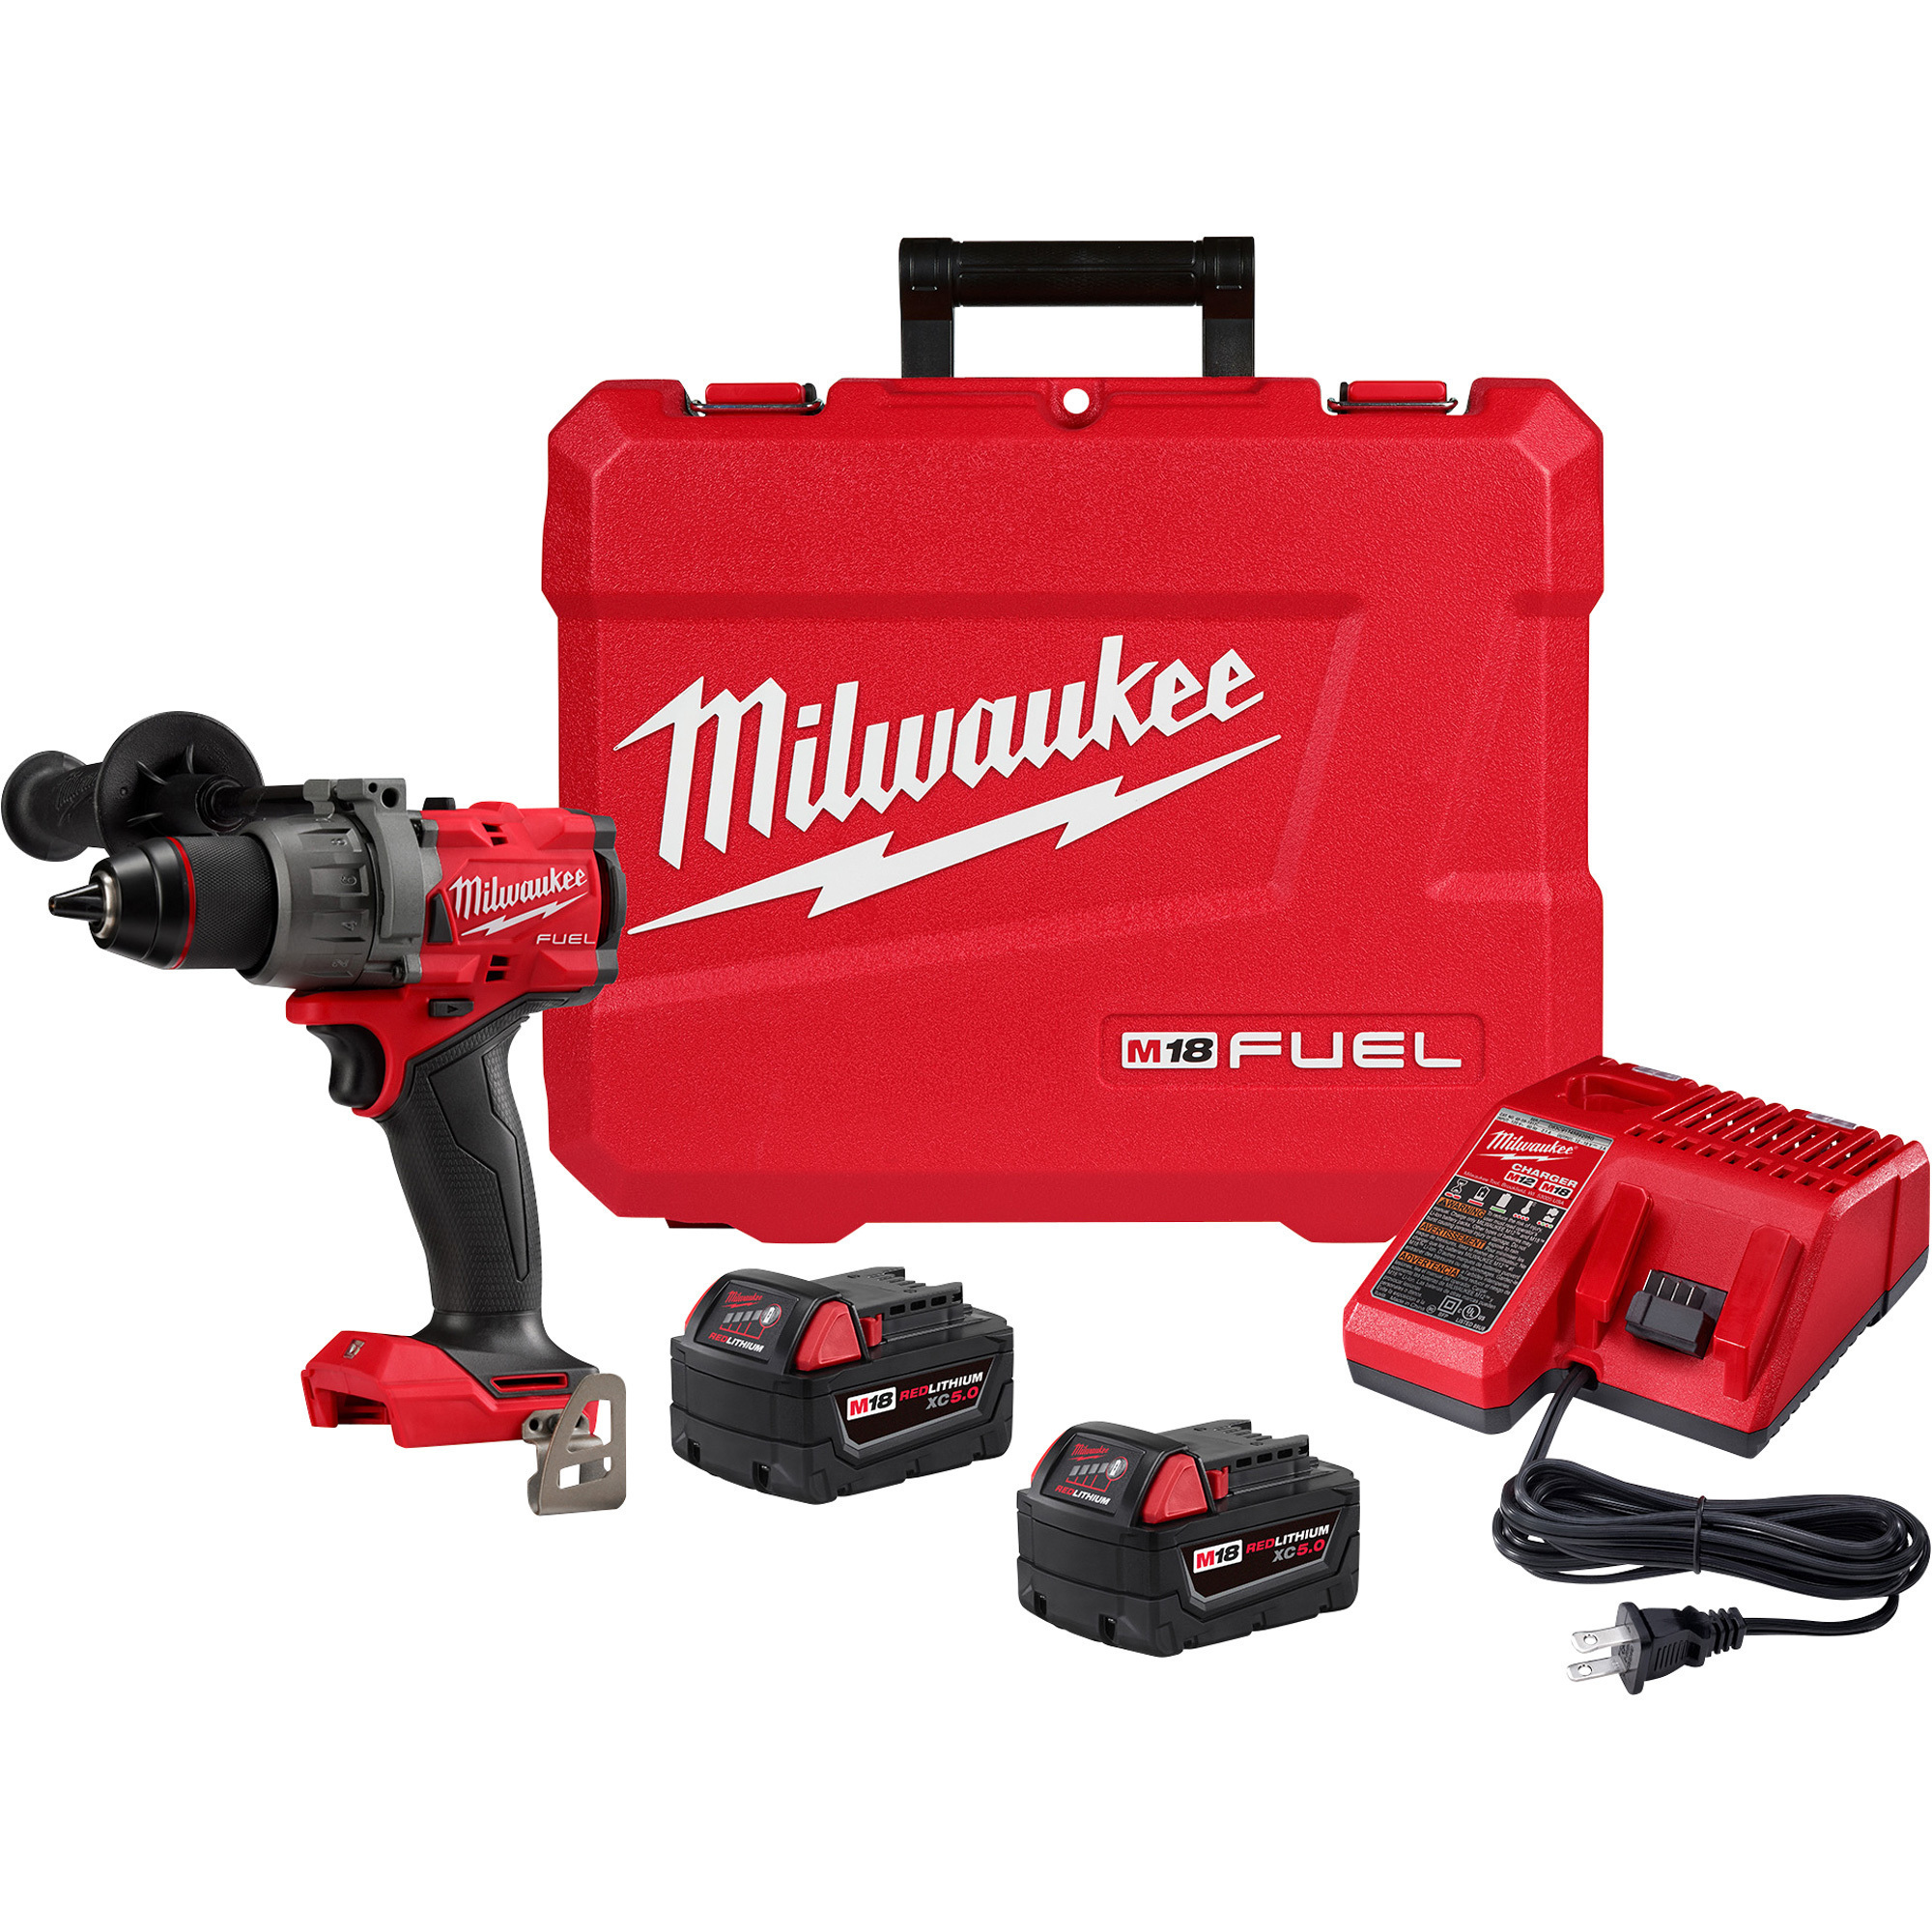 Milwaukee M18 FUEL 1/2Inch Drill/Driver Kit, Two Batteries, Model 2903-22